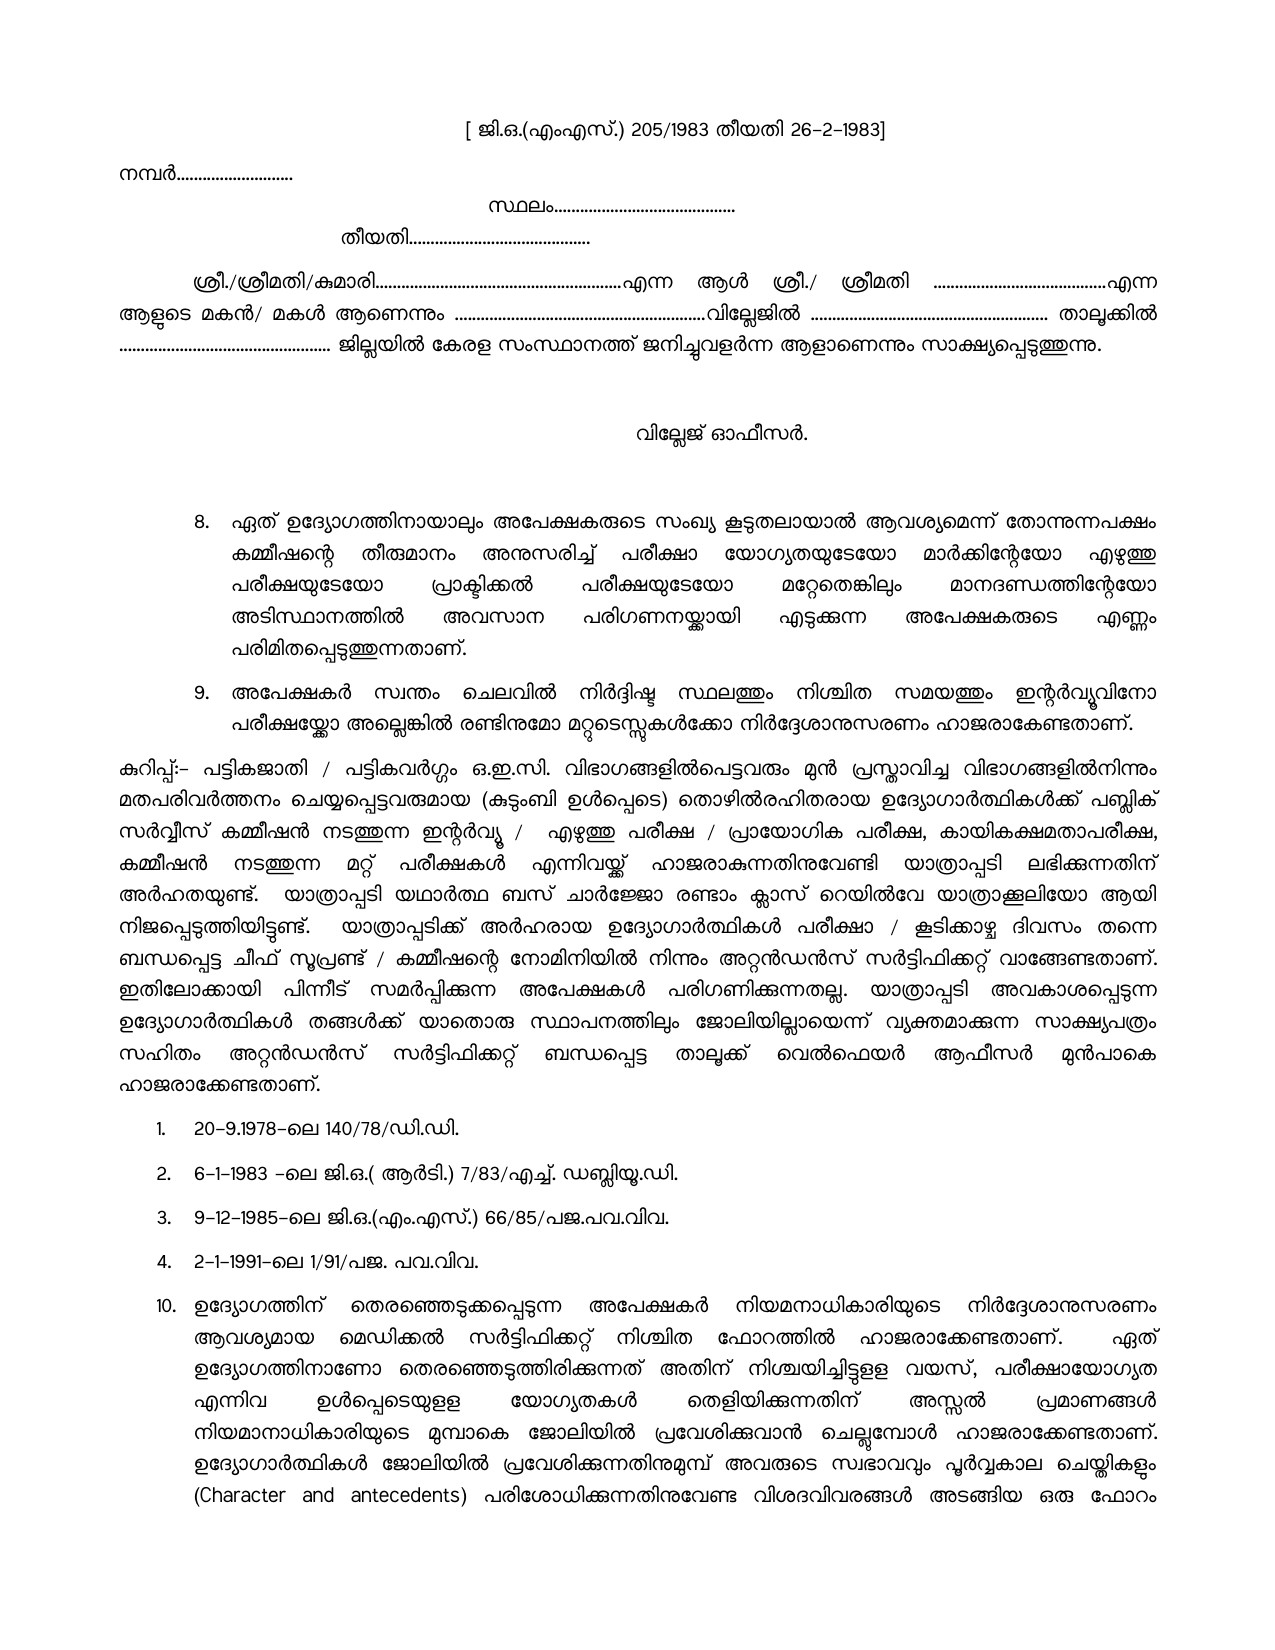 General Conditions and Certificate Formats in Malayalam - Notification Image 11